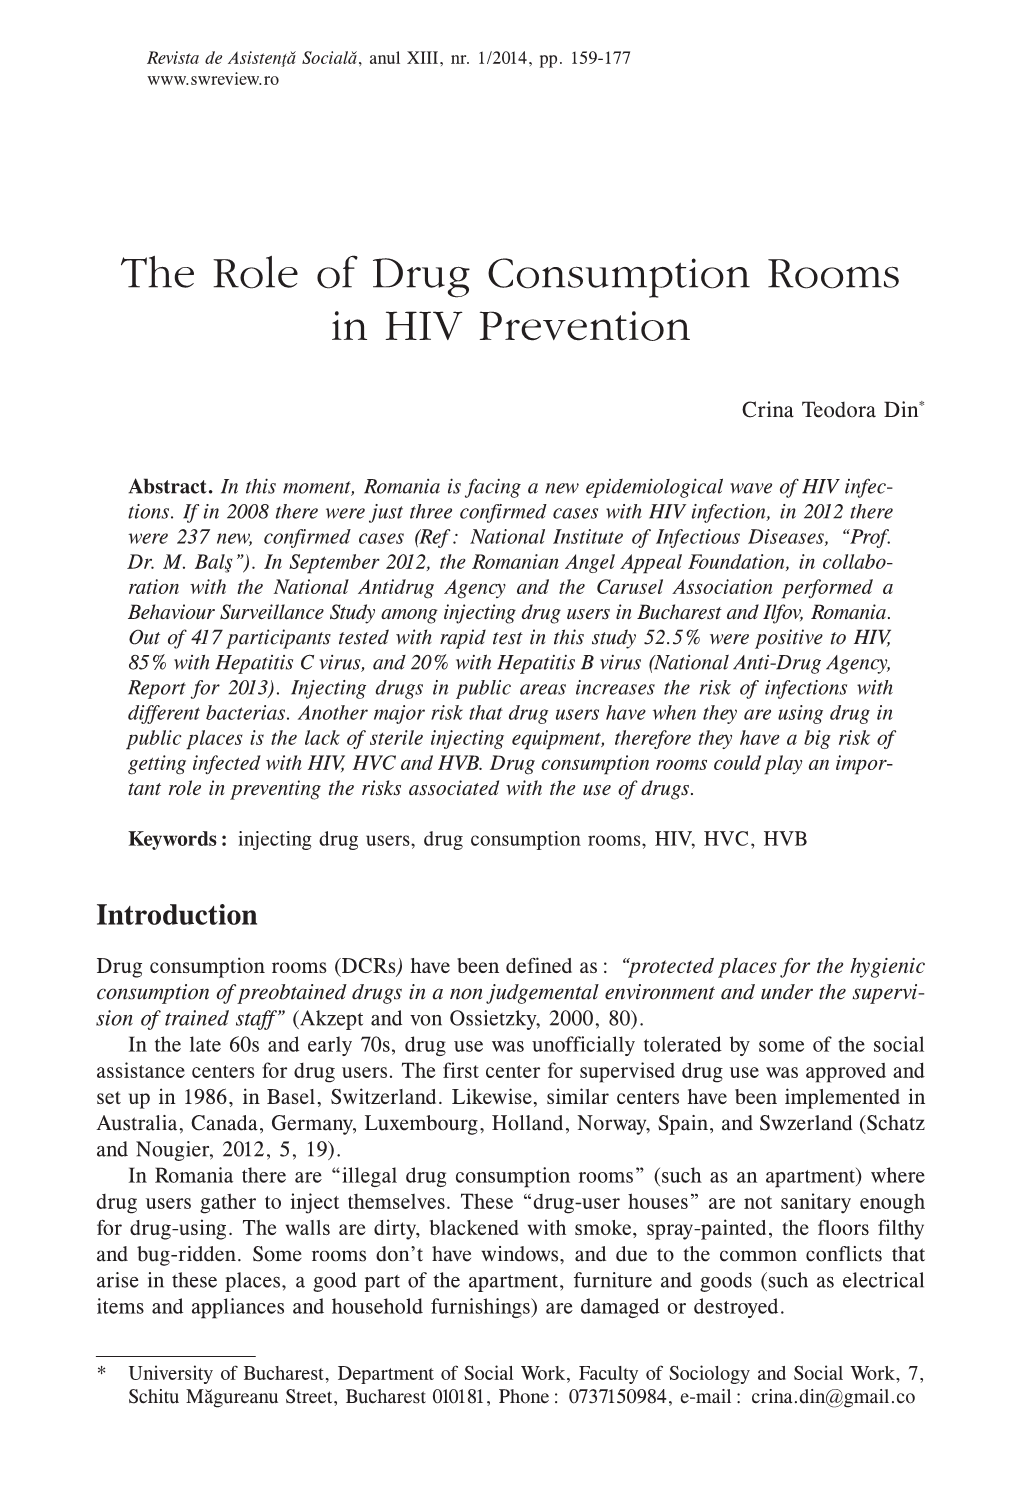 The Role of Drug Consumption Rooms in HIV Prevention